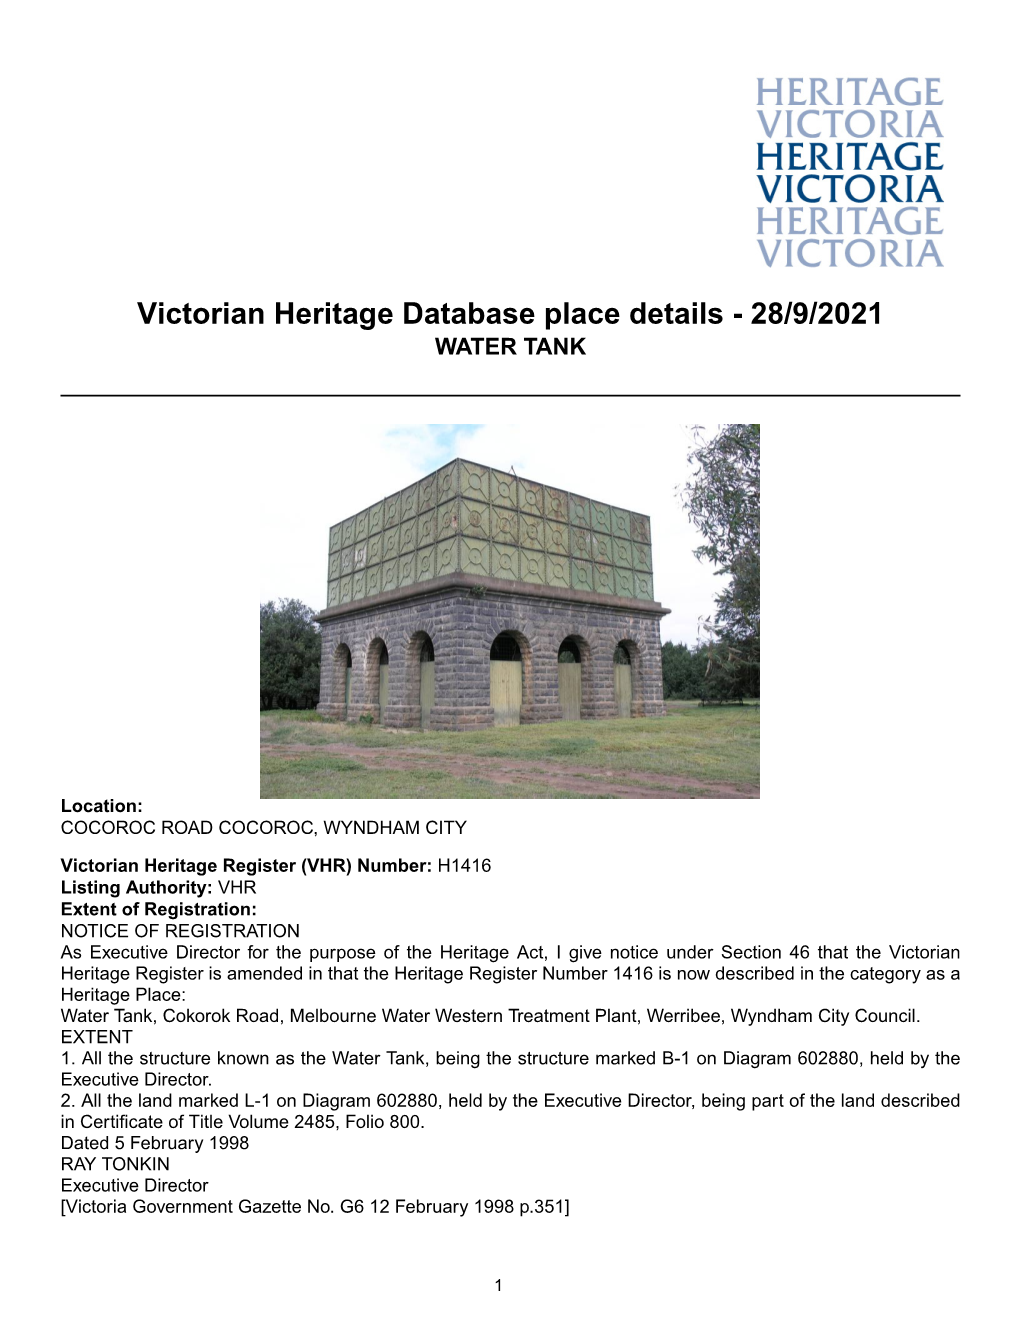 Victorian Heritage Database Place Details - 28/9/2021 WATER TANK